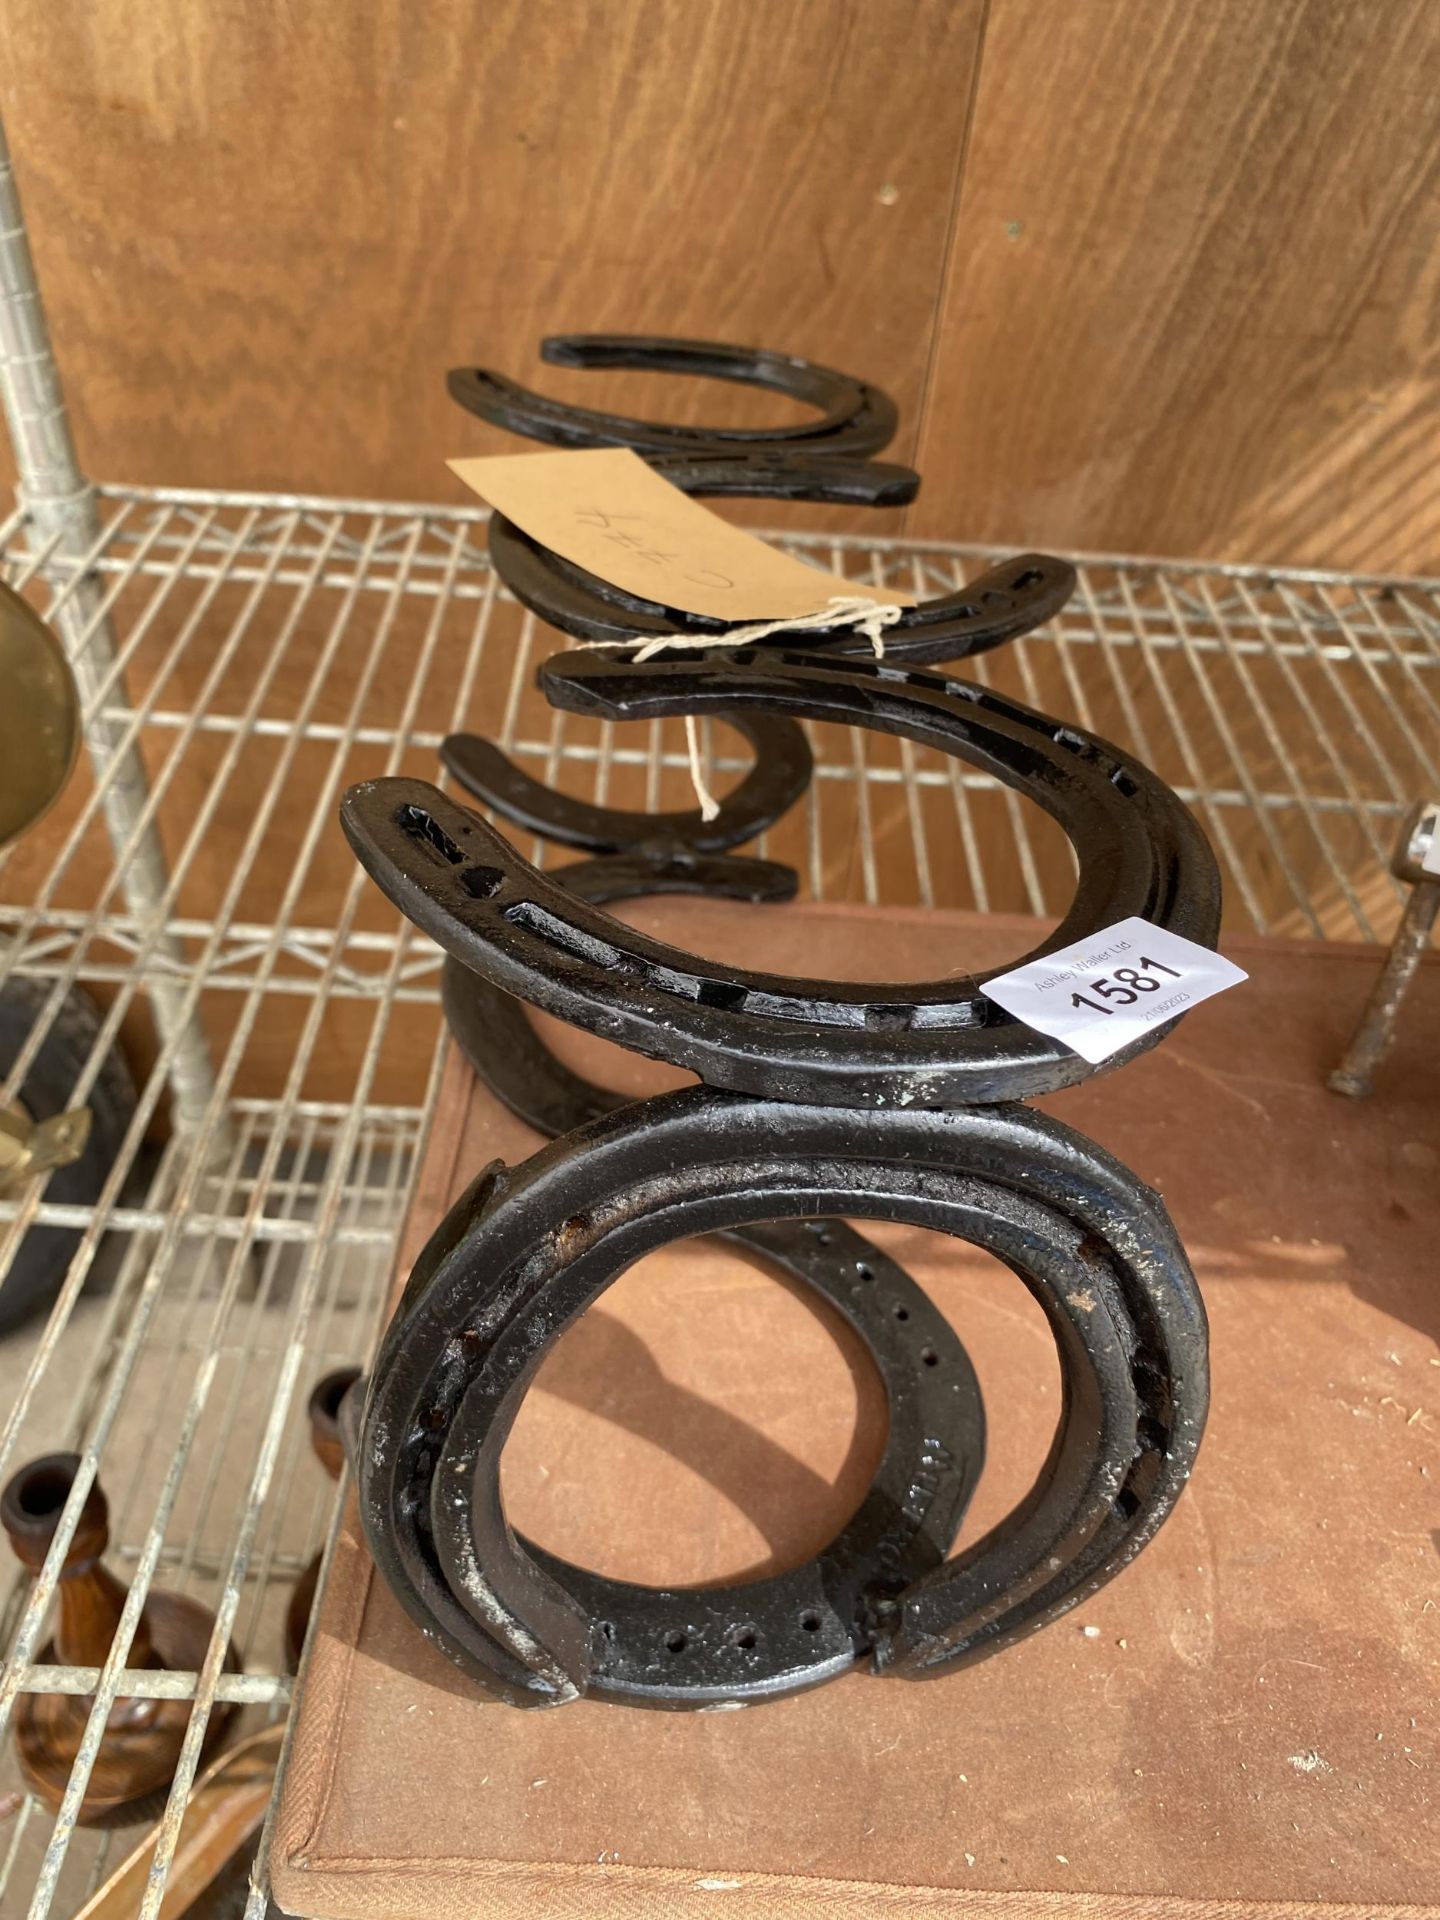 A THREE BOTTLE WINE HOLDER FORMED FROM HORSE SHOES